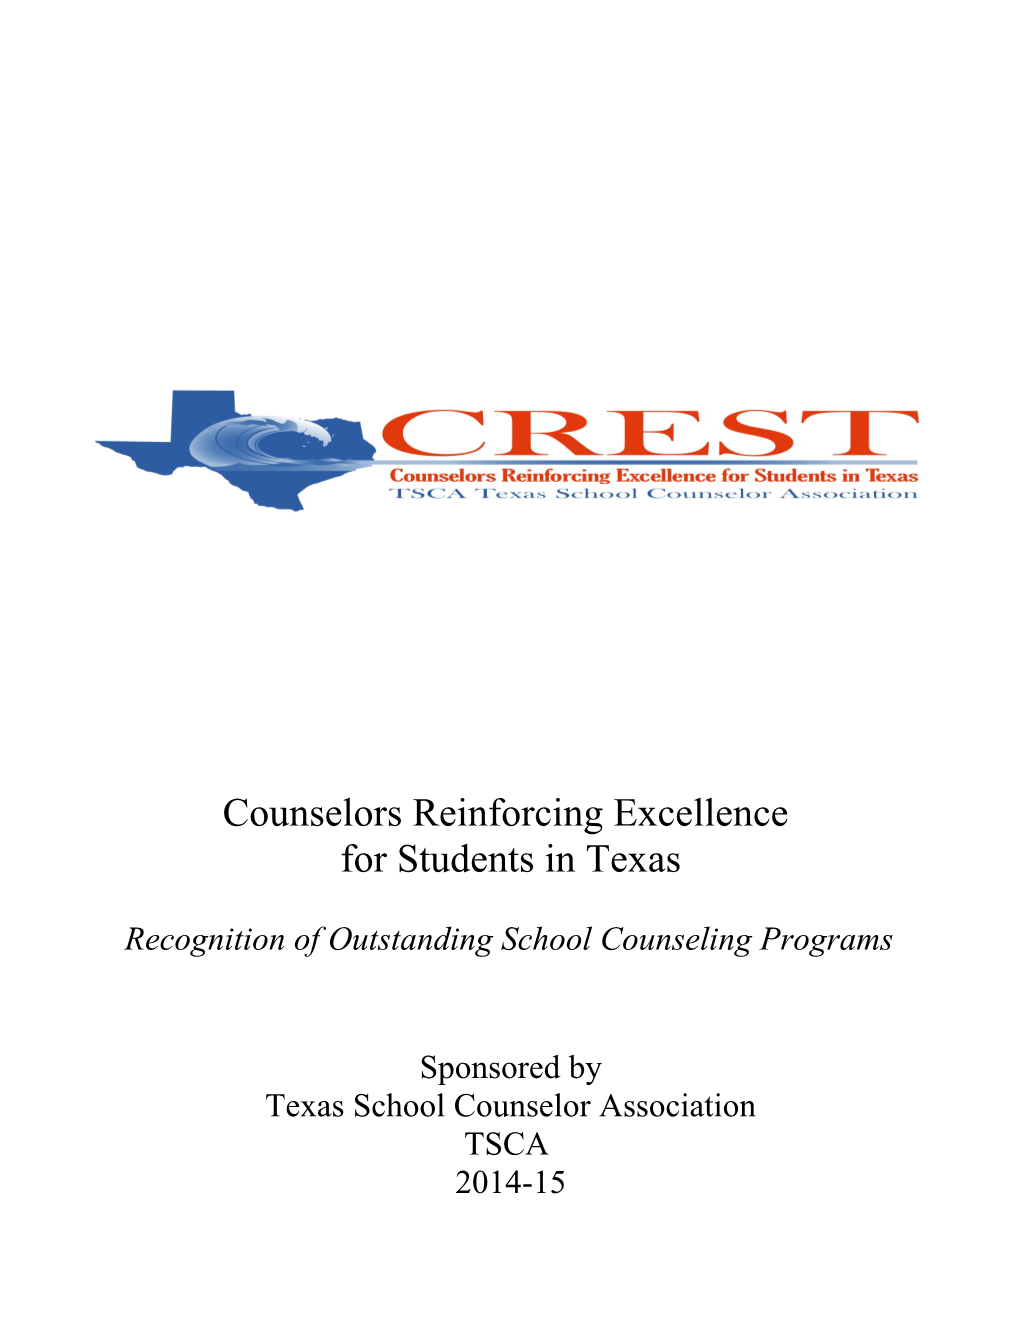 Recognition of Outstanding School Counseling Programs